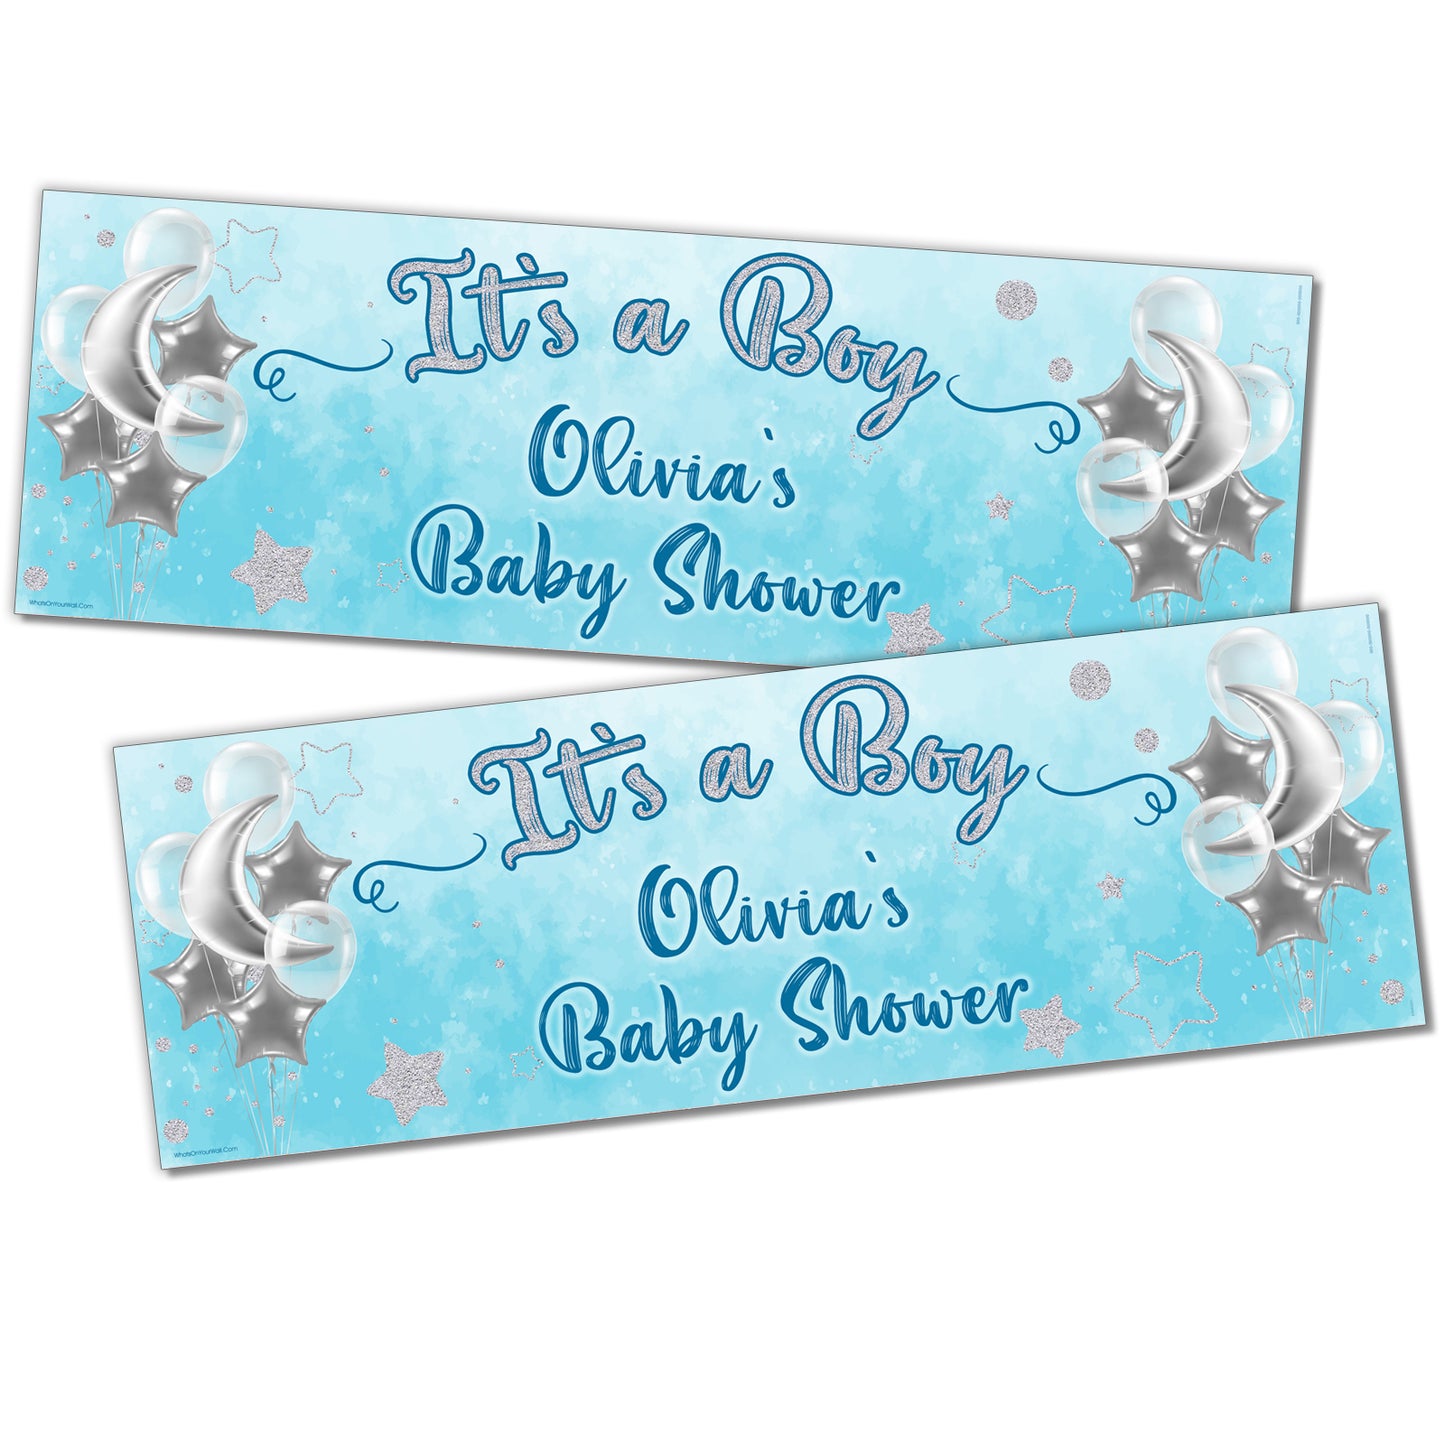 personalised banners birthday